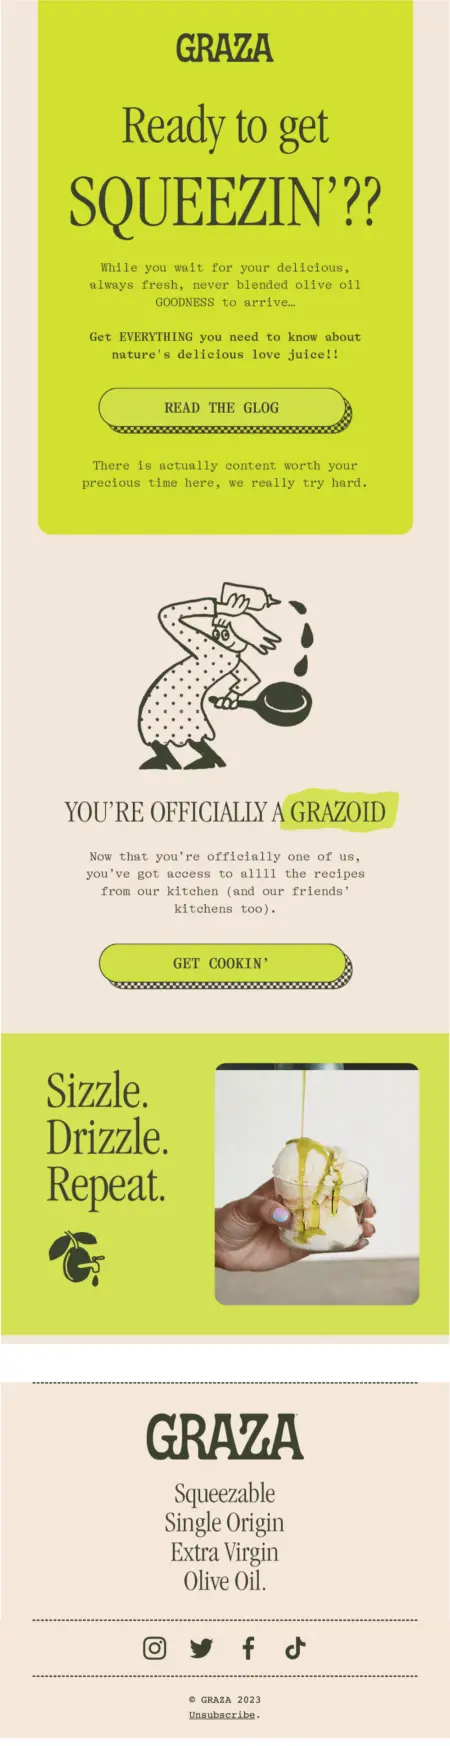 Image shows a colorful post-purchase email from Graza, including call-to-action buttons to their blog that has recipes and images of a cartoon chef and close-up product shots.